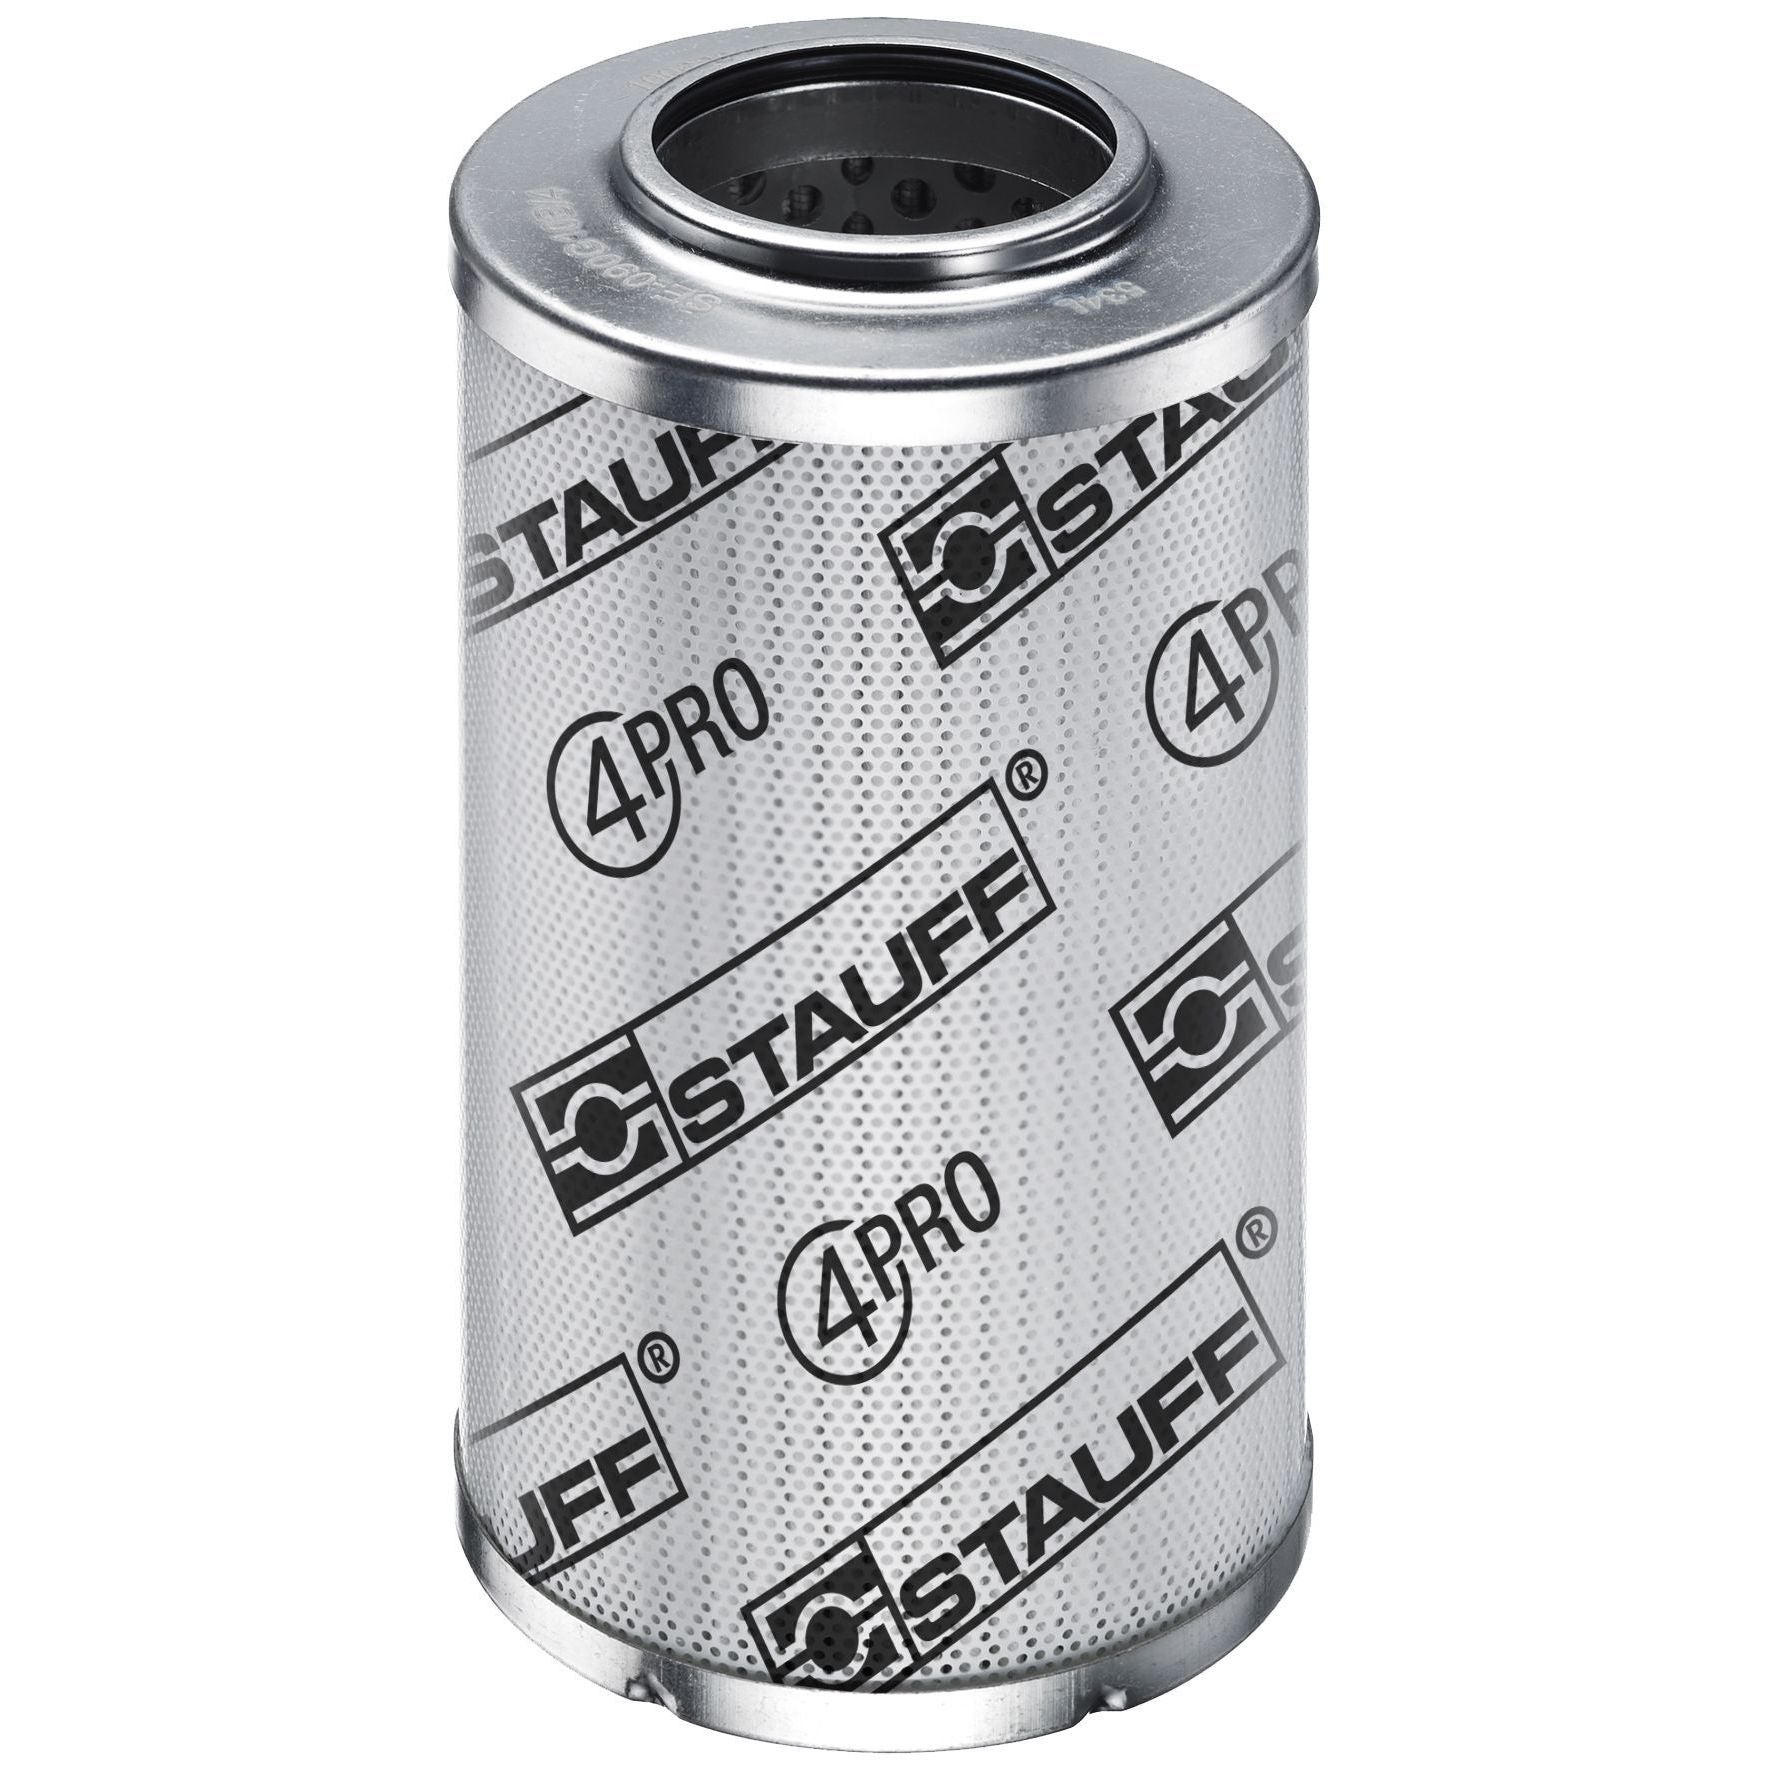 SE-035-G-10-B/4 : Stauff SF-030 Series Filter Element, 10 Micron, Synthetic, 363psi Collapse Differential, Buna